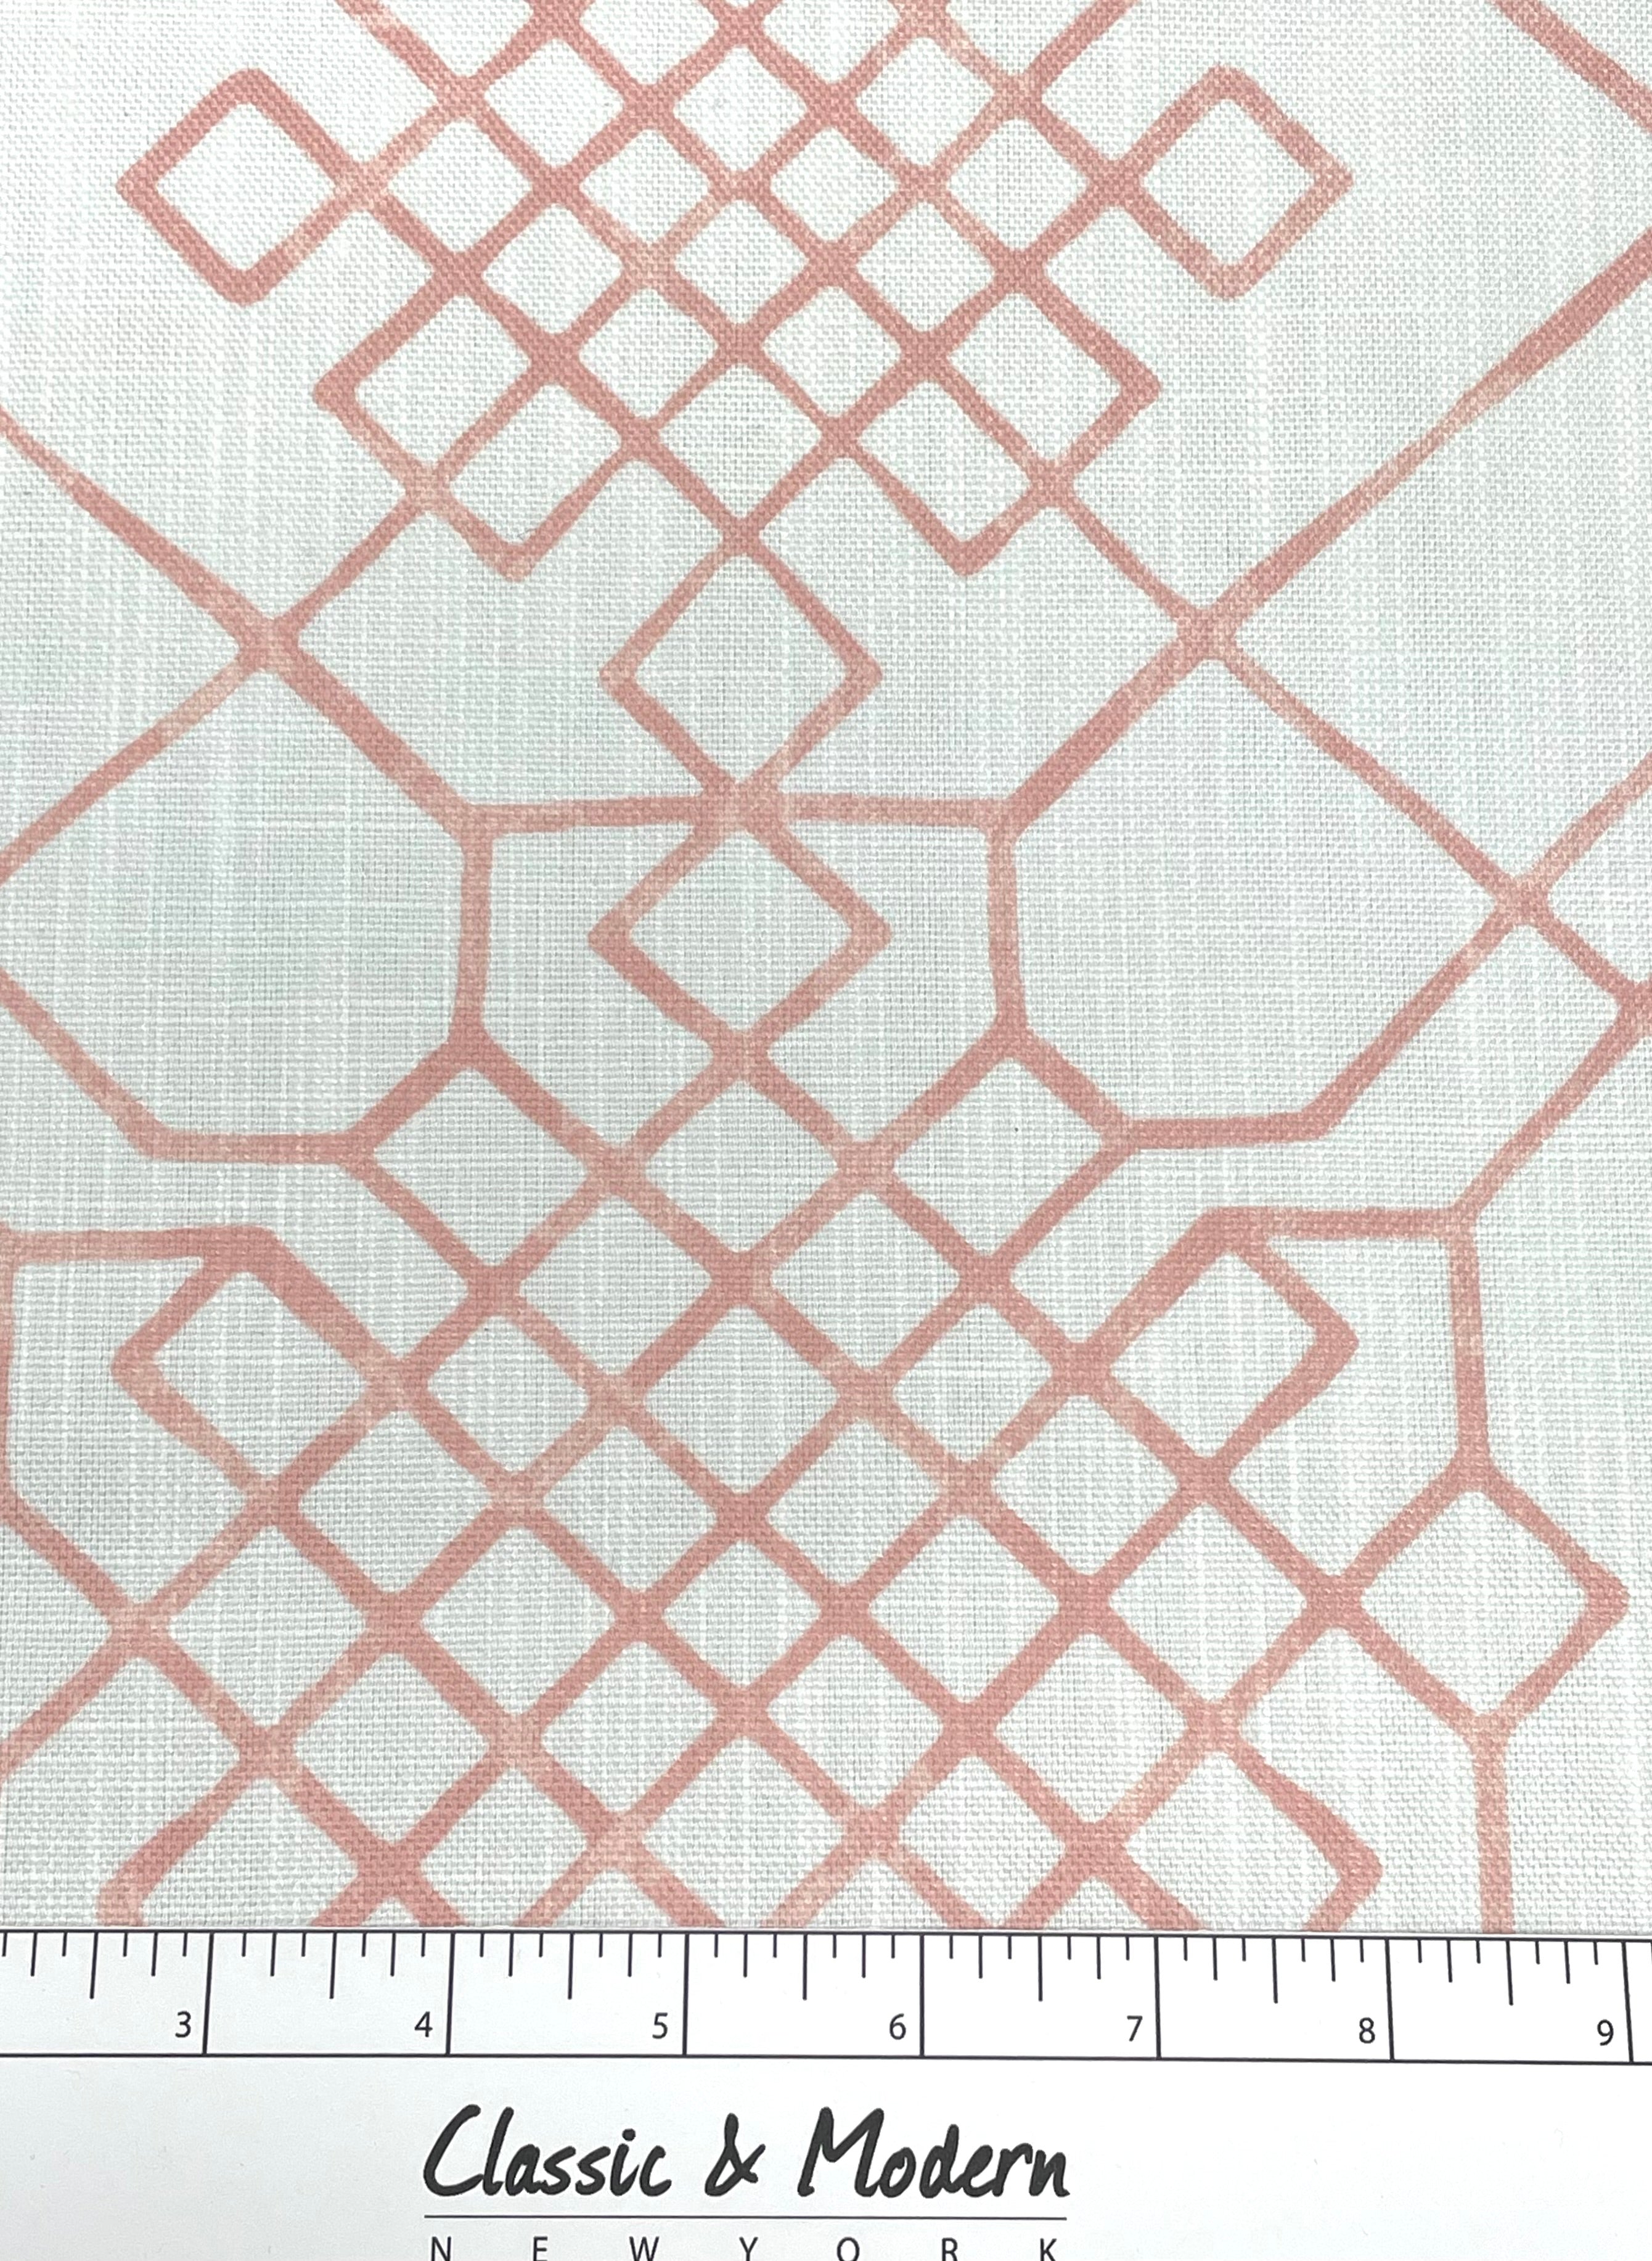 Celtic knot Faux Linen Fabric By The Yard, Curtain, Drapery, Table Top, Upholstery